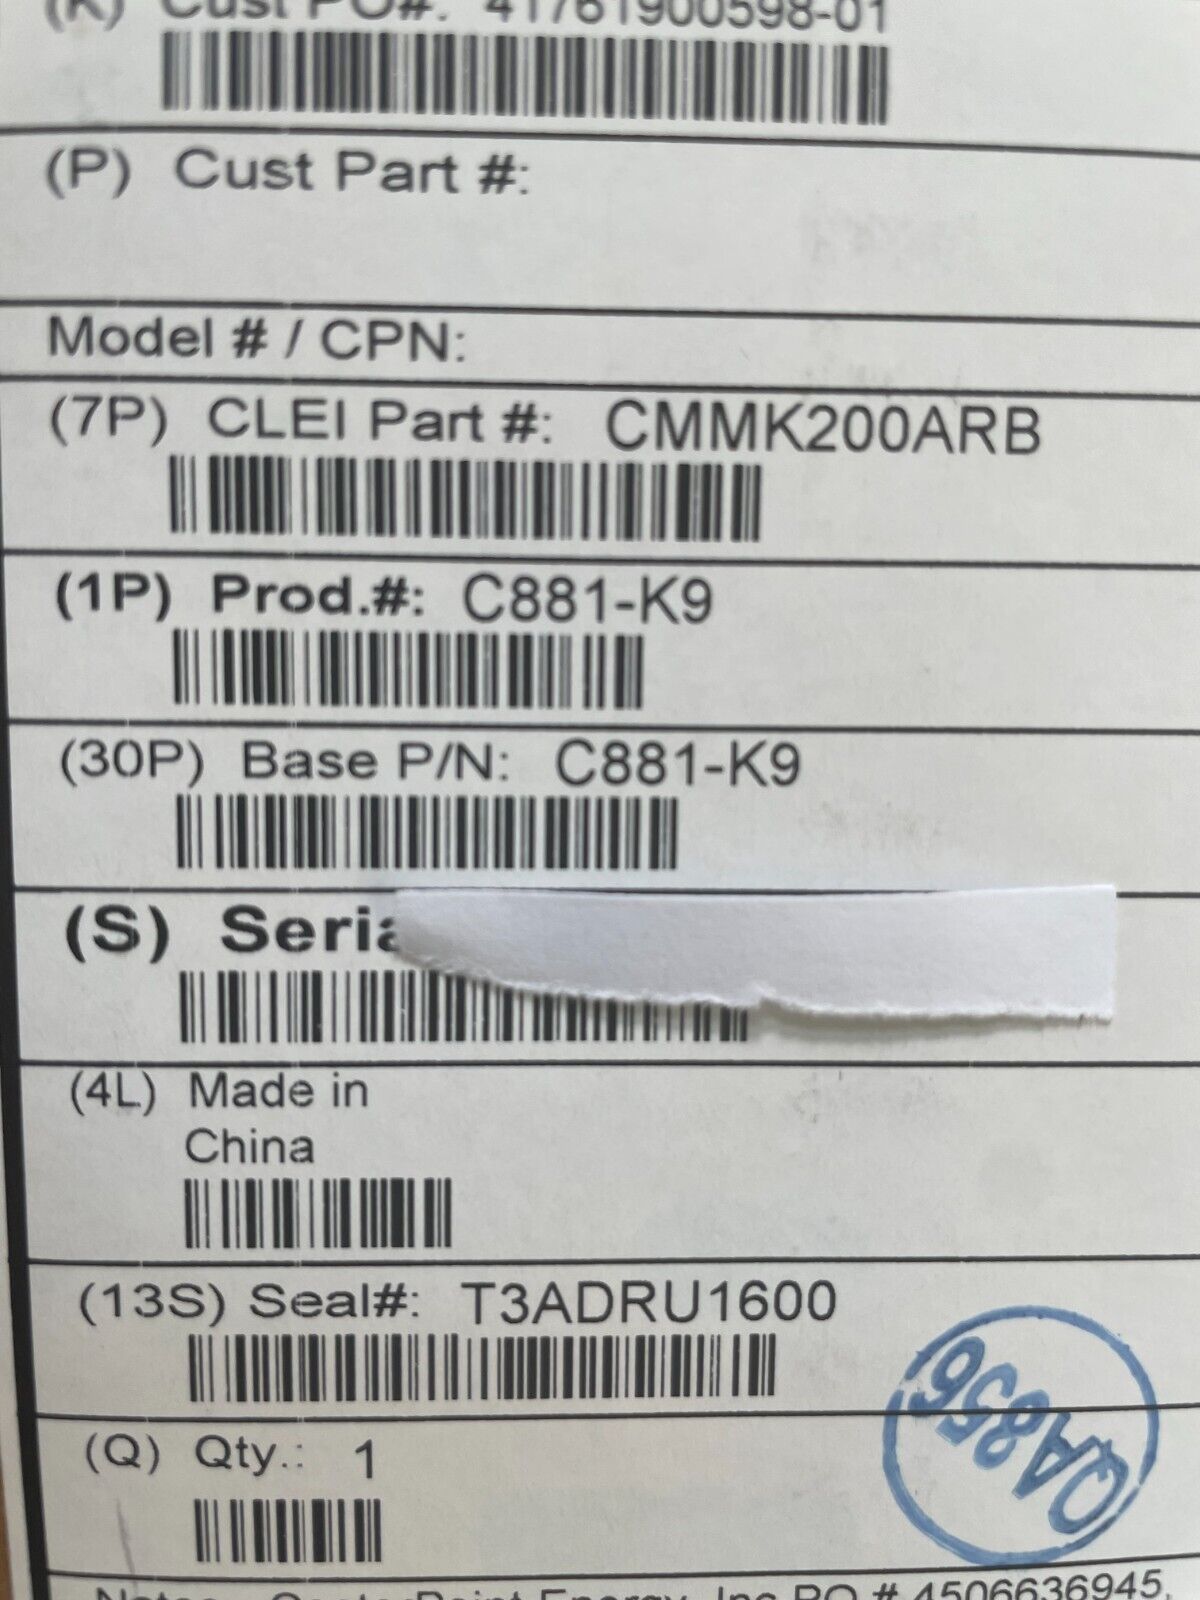 New Cisco 881 C881-K9 Router with 800G2-POE-2 PoE and PWR-66W-AC PWR Supply